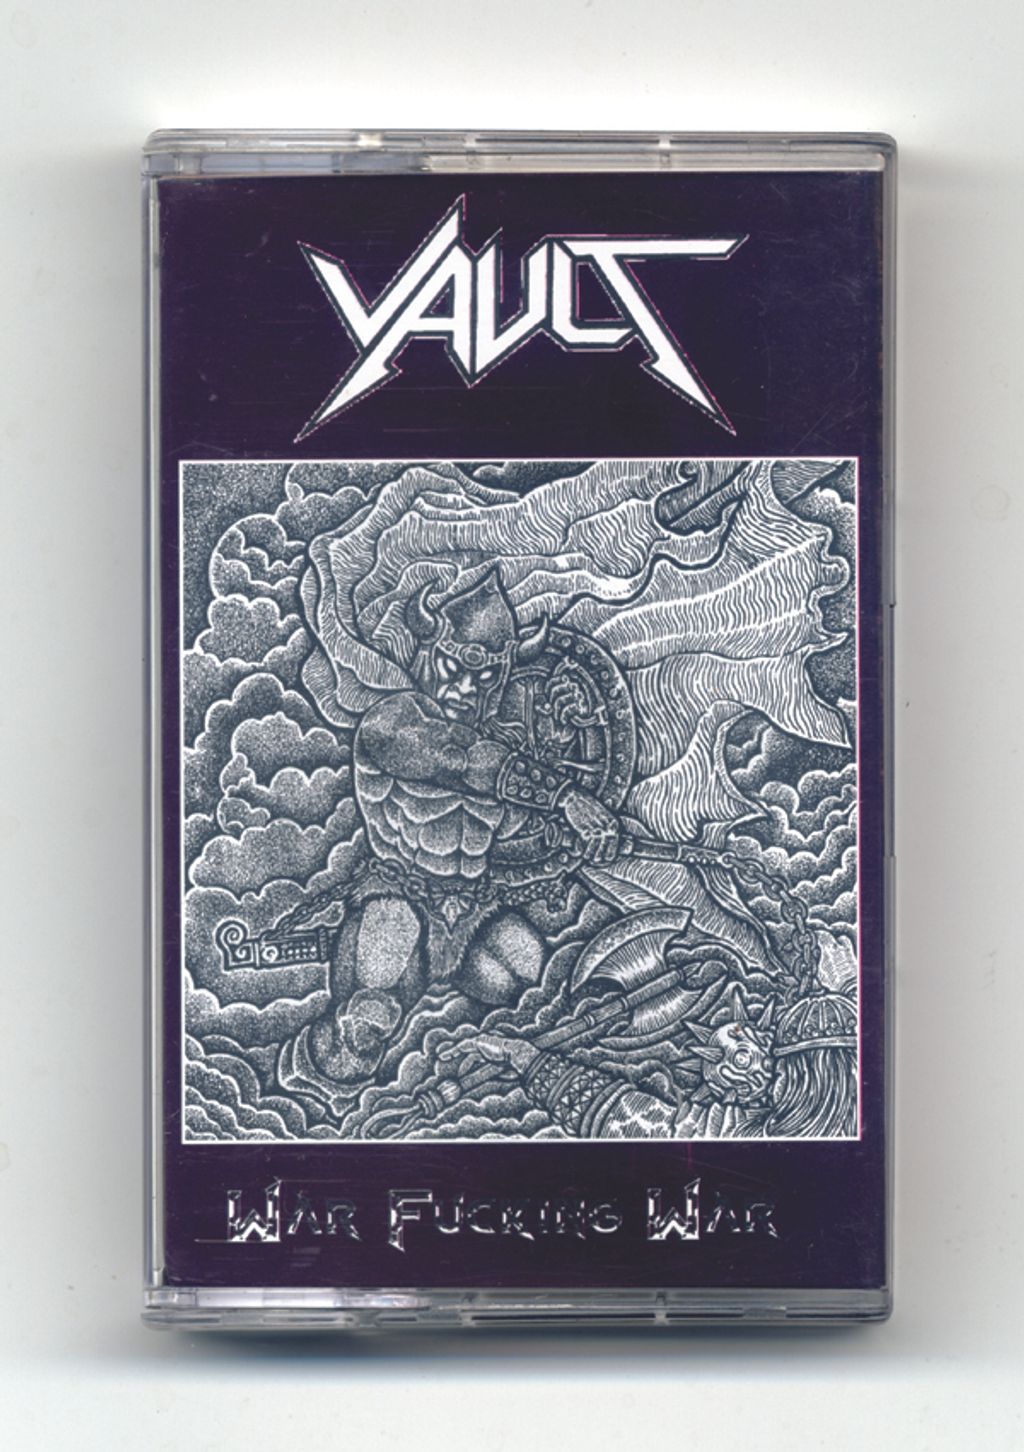 vault wfw 3rd cover 4th pressing.jpg